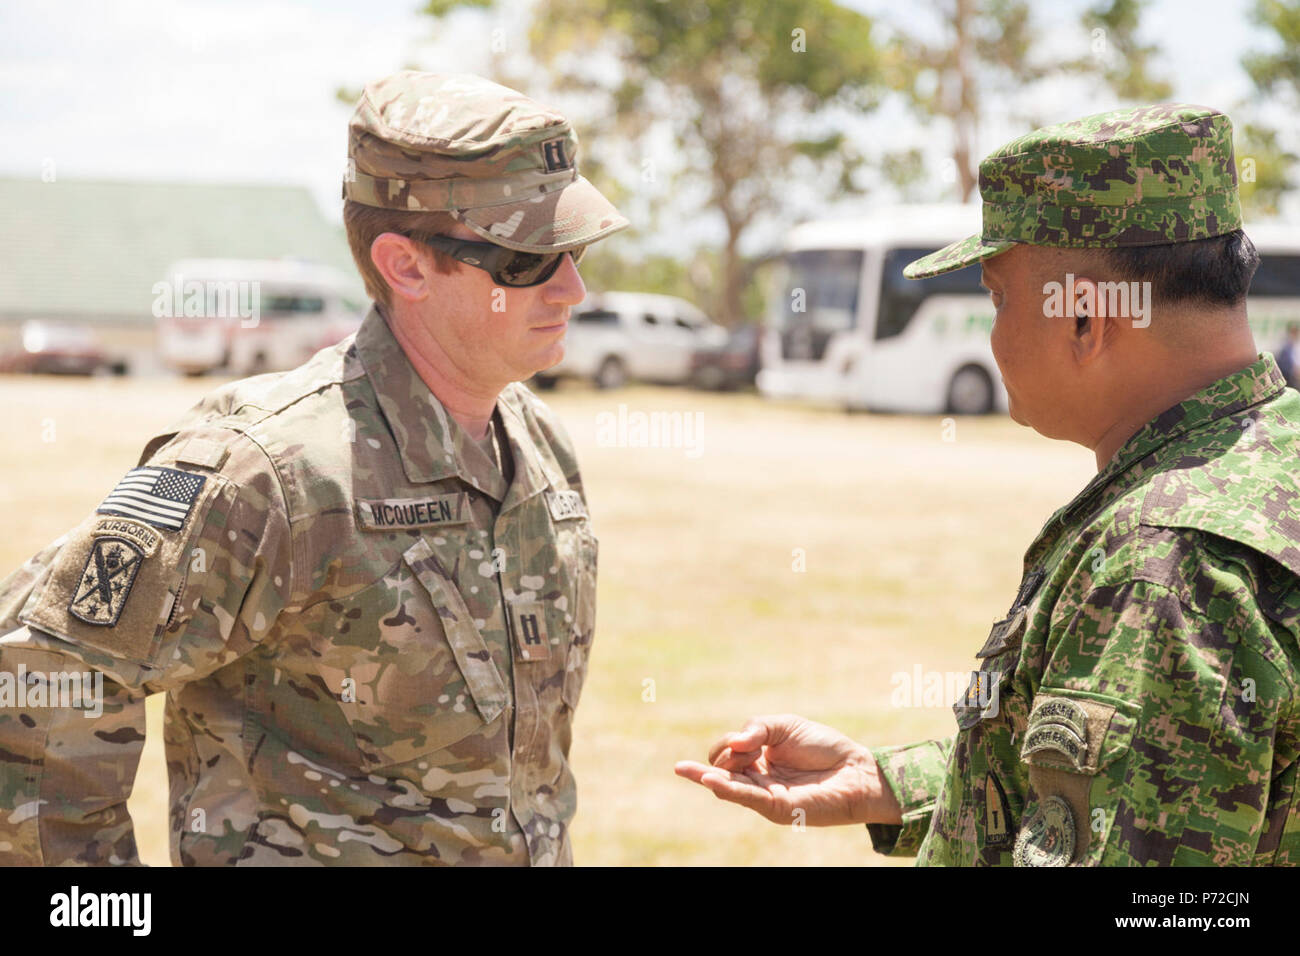 U.S. Army Capt. Robert McQueen speaks with Philippine Army Col. Lawrence Mina during a site visit in support of Balikatan 2017 at Camp Dela Cruz in Upi, Gamu, Isabela, May 11, 2017. McQueen is a civil affairs officer with the 405th Civil Affairs Battalion and Mina is the deputy assistant chief of staff for Training and Education Staff, Philippine Army. Balikatan is an annual U.S.-Philippine bilateral military exercise focused on a variety of missions, including humanitarian assistance and disaster relief, counterterrorism and other combined military operations. Stock Photo